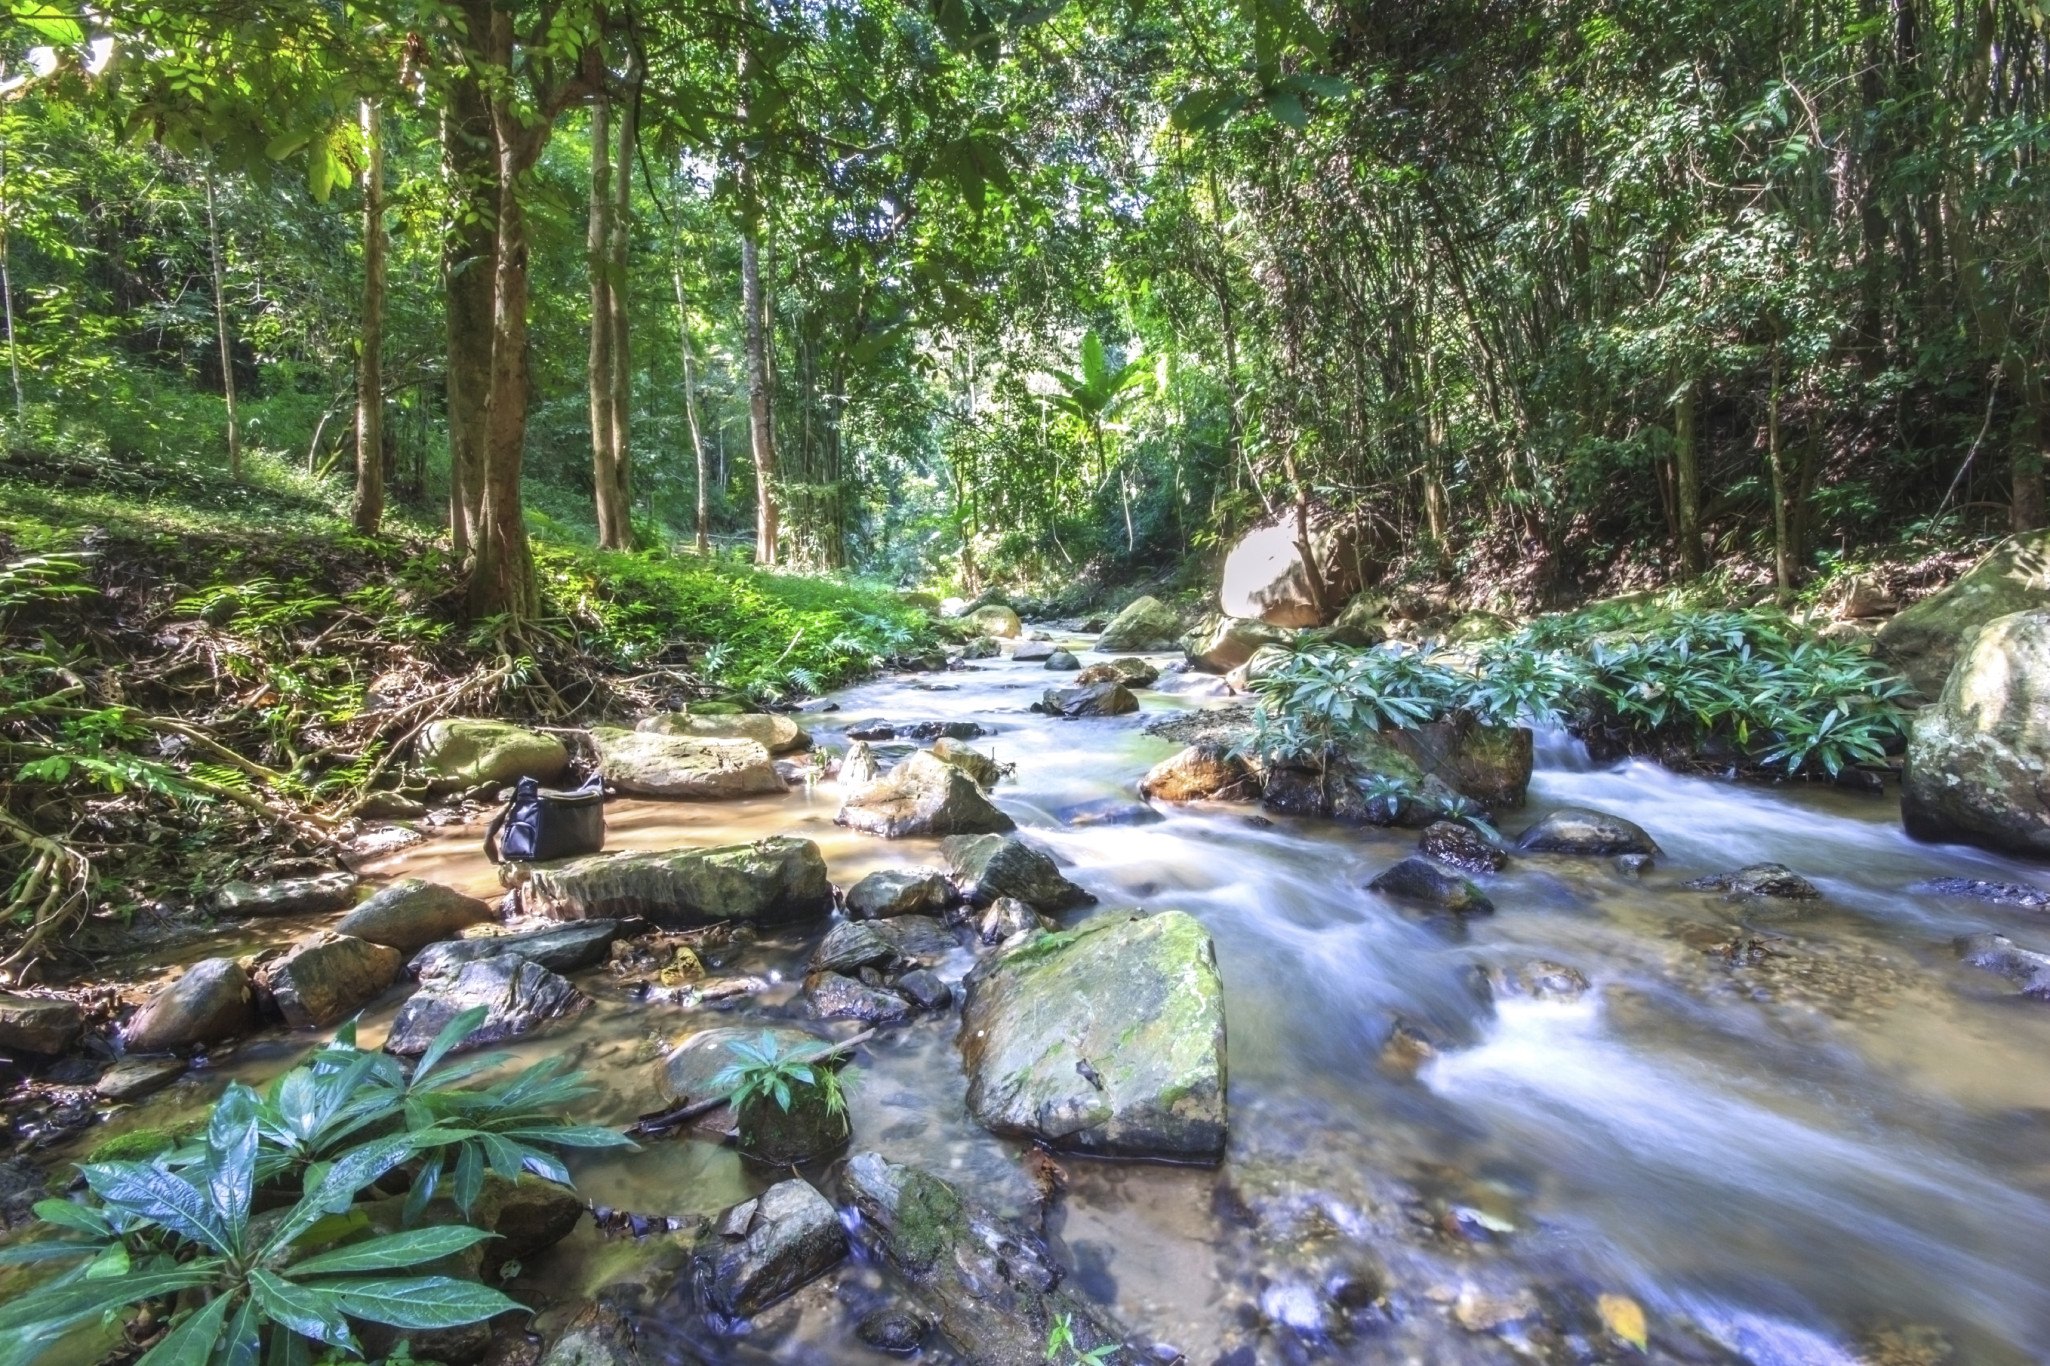 Streams in the tropical rainforest